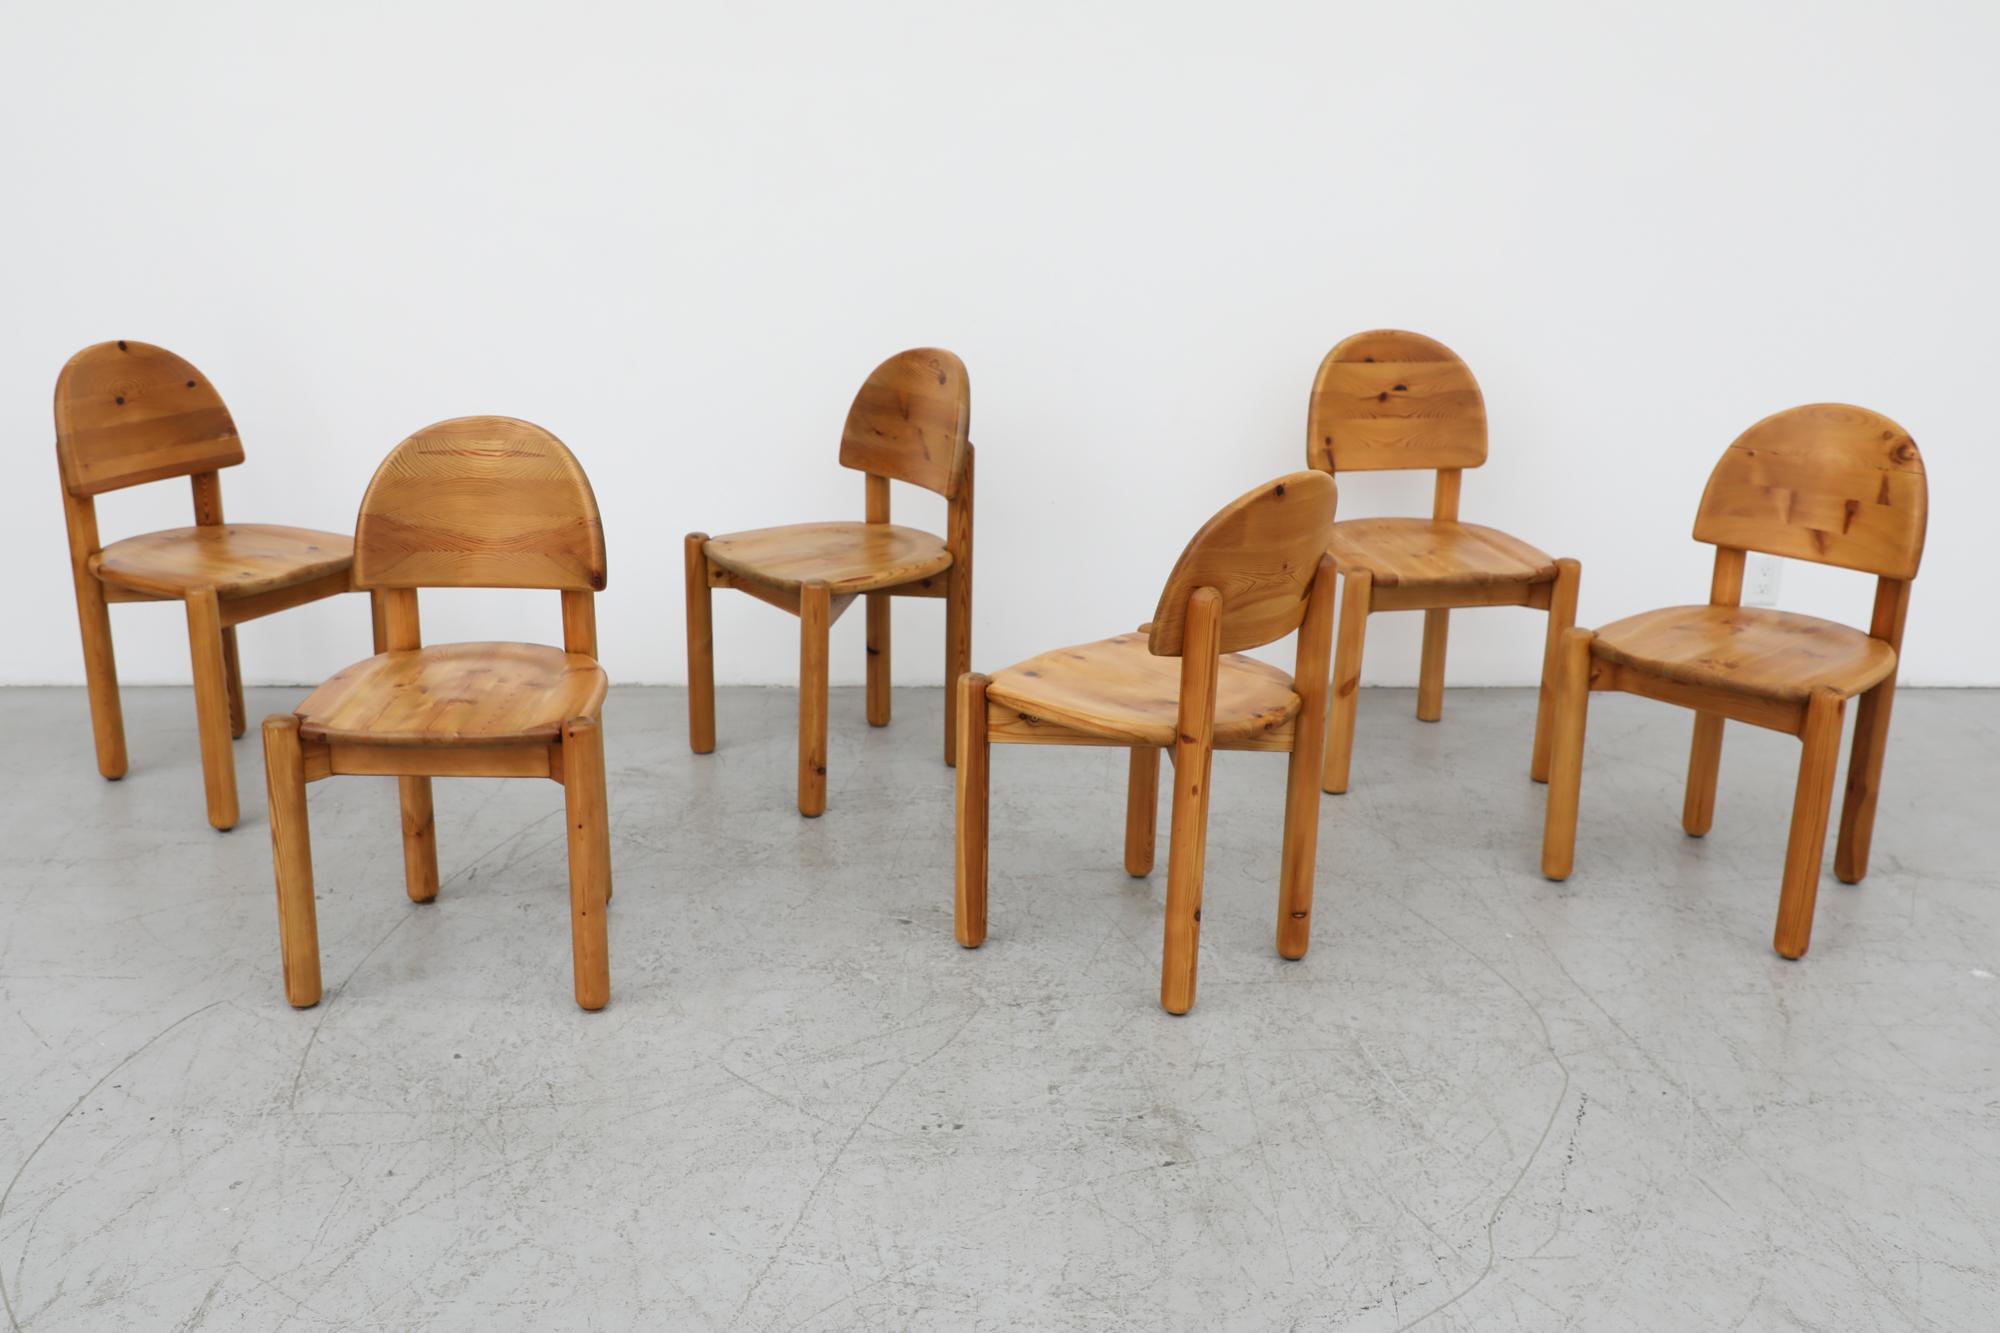 Set of 6, mid century, Rainer Daumiller designed, solid pine dining chairs with attractive half moon backrests. Lightly refinished with some visible wear consistent with its age and use. One chair has an old crack in the back rest that was repaired